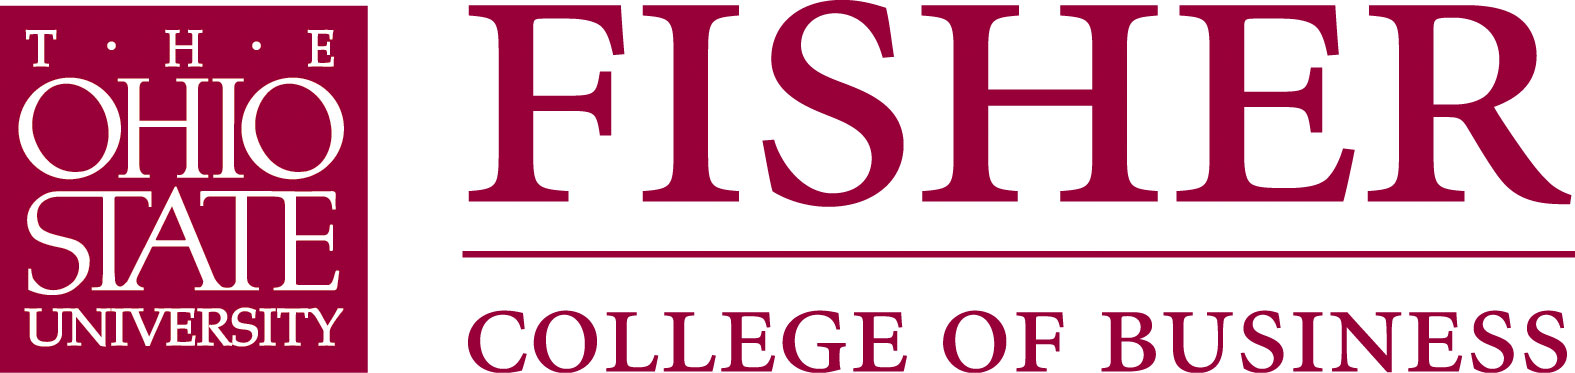 ohio-state-university-fisher-college-of-business